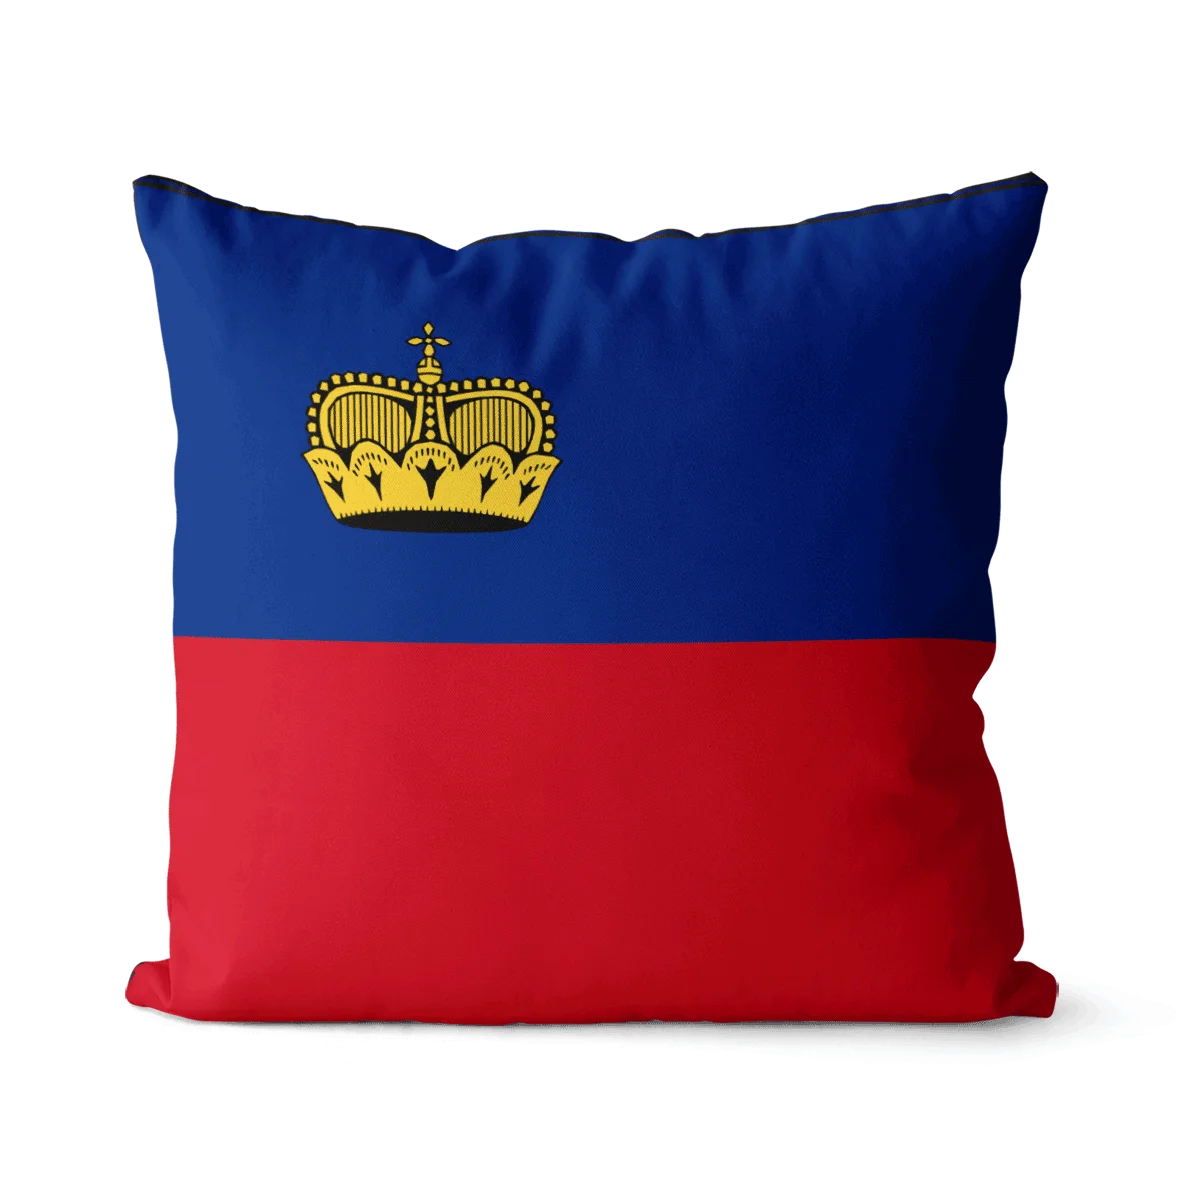 

Flag of Lithuania pattern square pillowcase pure cotton linen pillowcase party home decoration sofa cushion cover 45x45cm 40x40